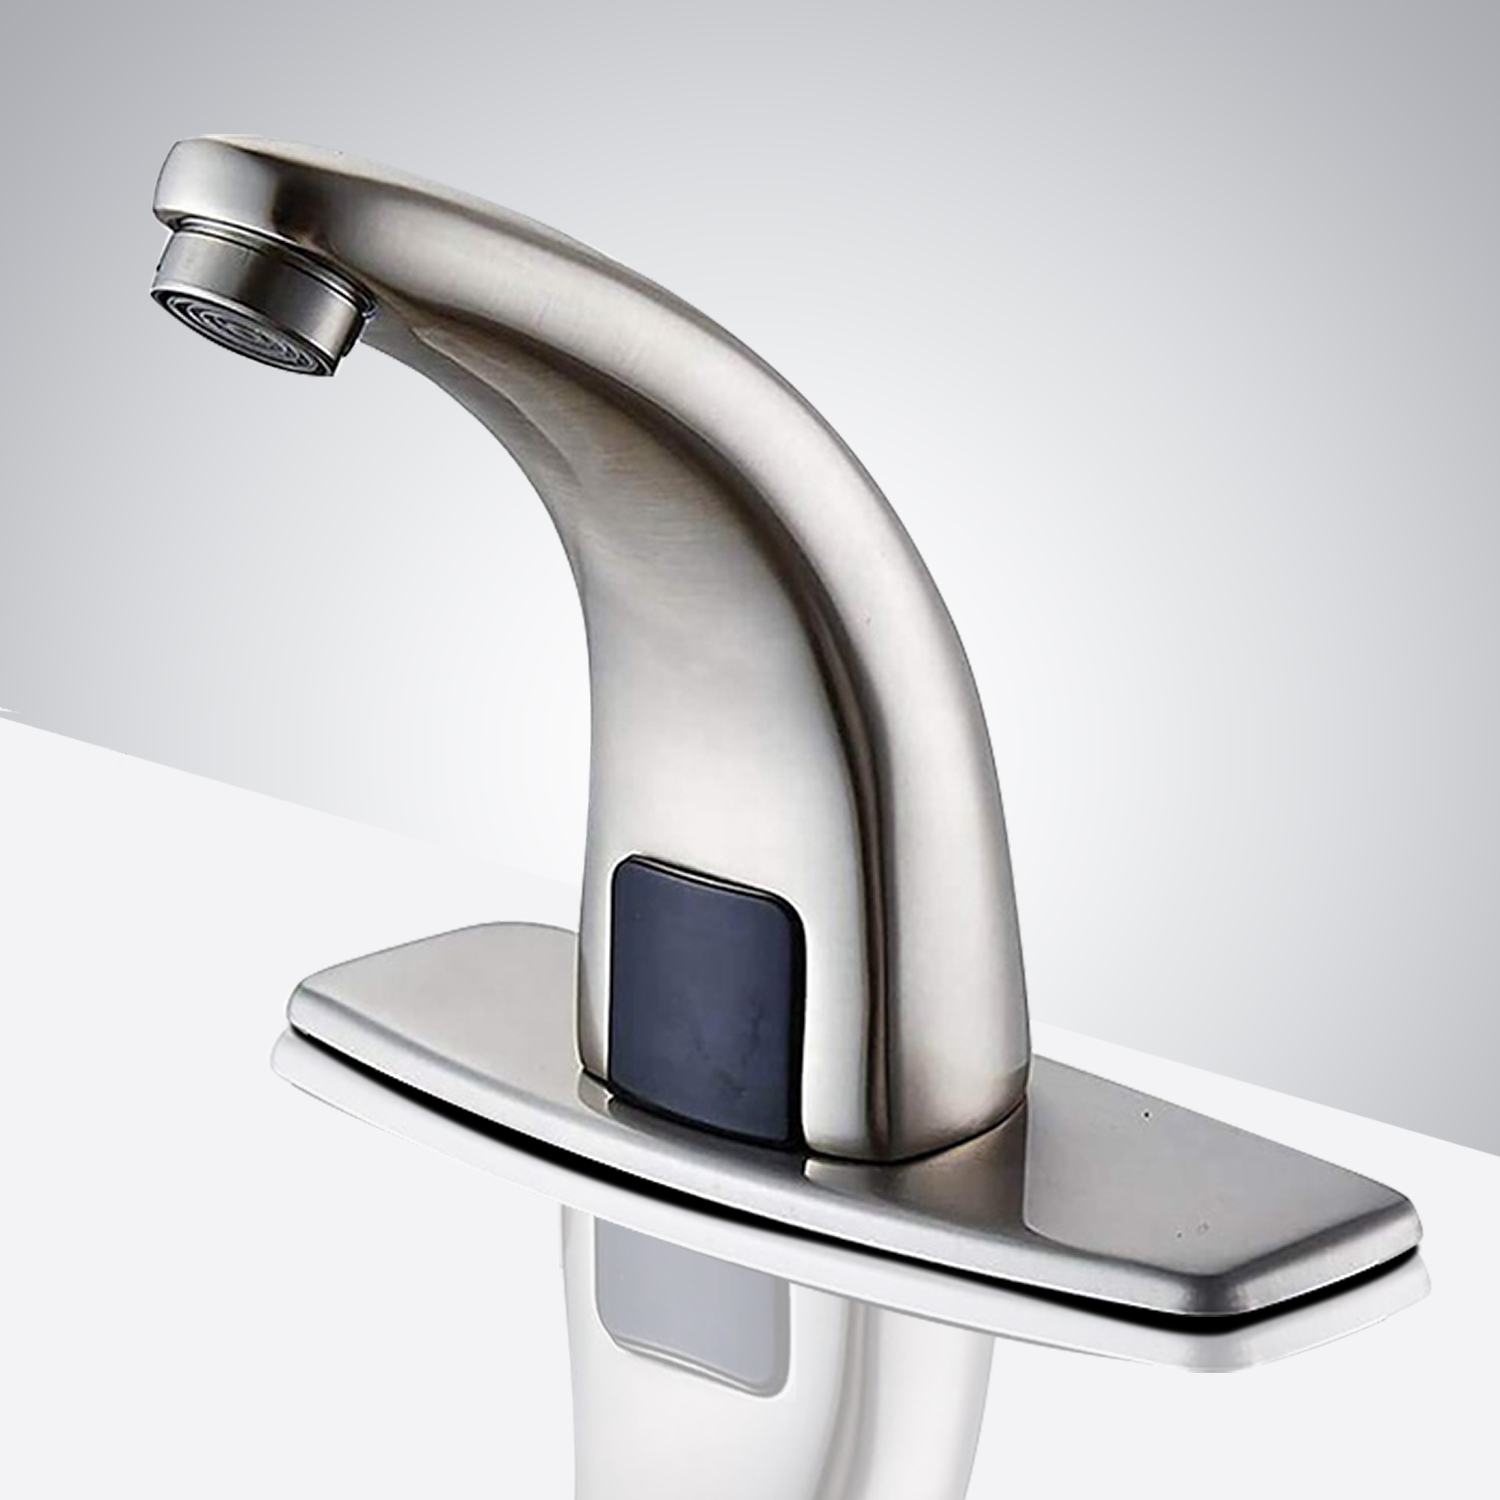 Fontana Milan Commercial Brushed Nickel Automatic Hands Free Faucet